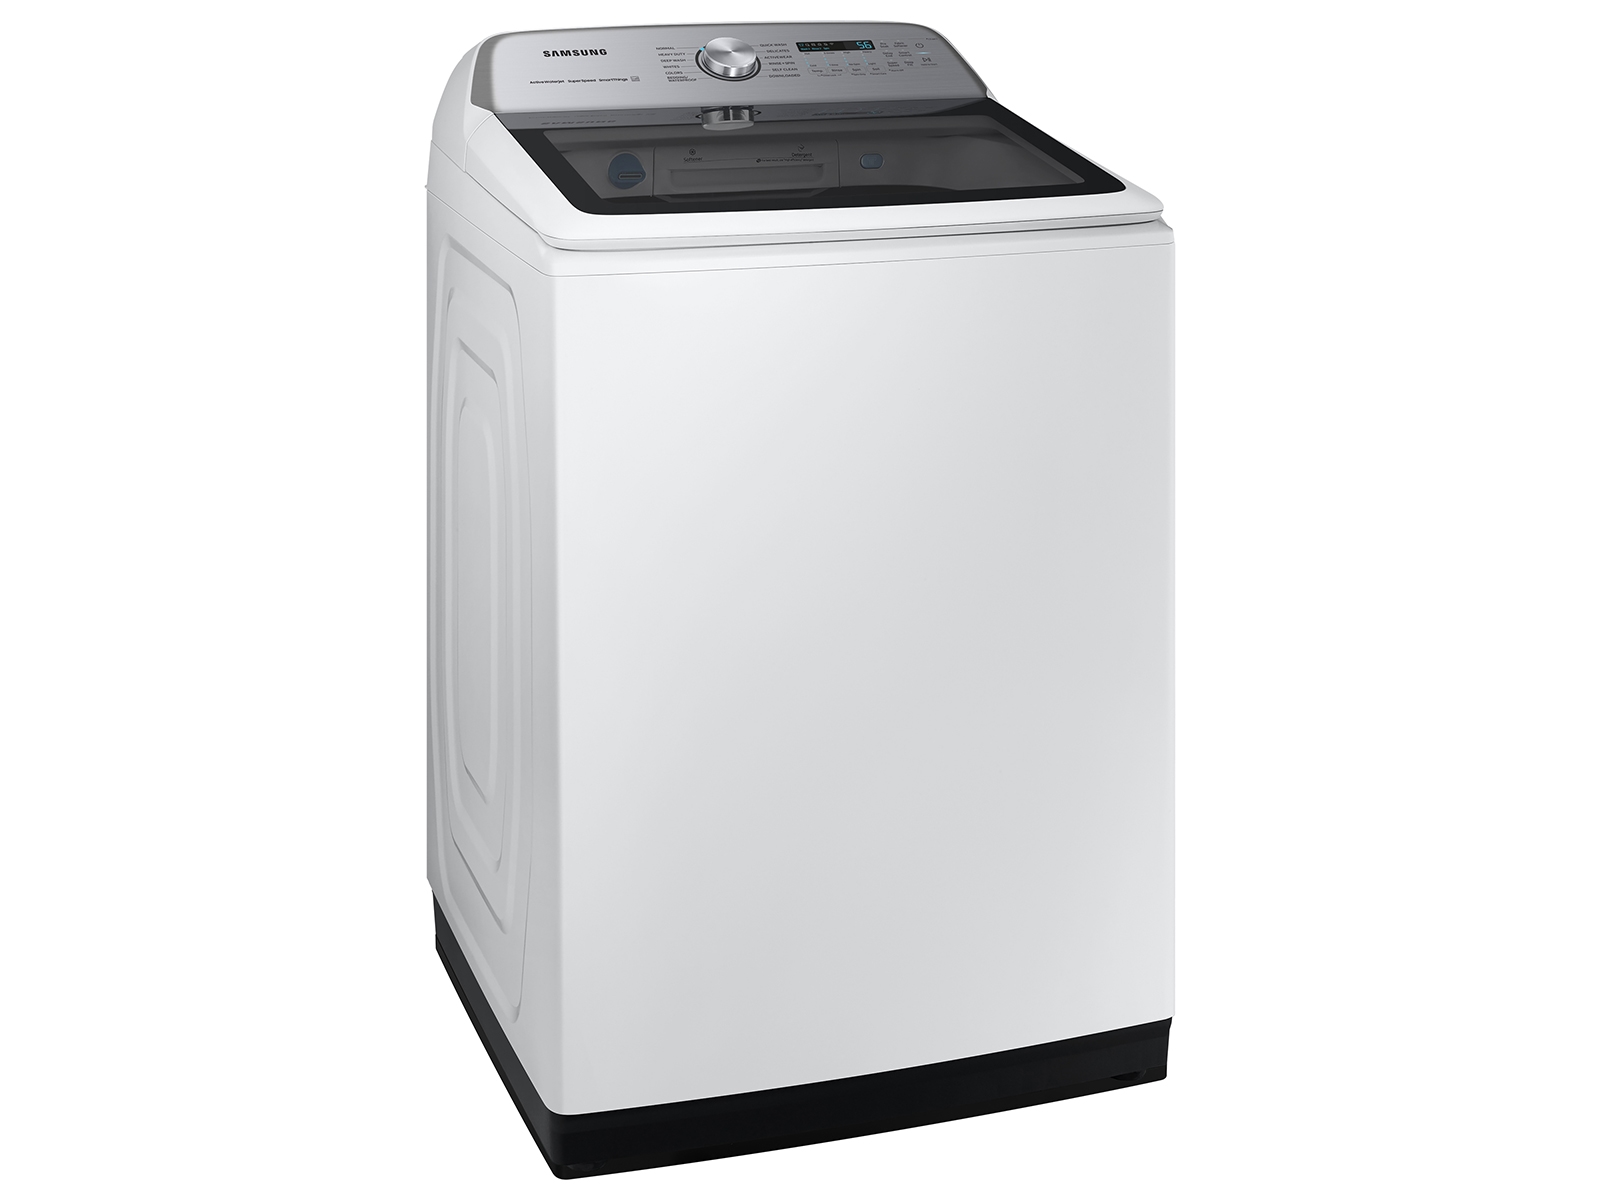  Kenmore 28 Top-Load Washer with Triple Action Agitator and 4.2  Cubic Ft. Total Capacity, White : Appliances